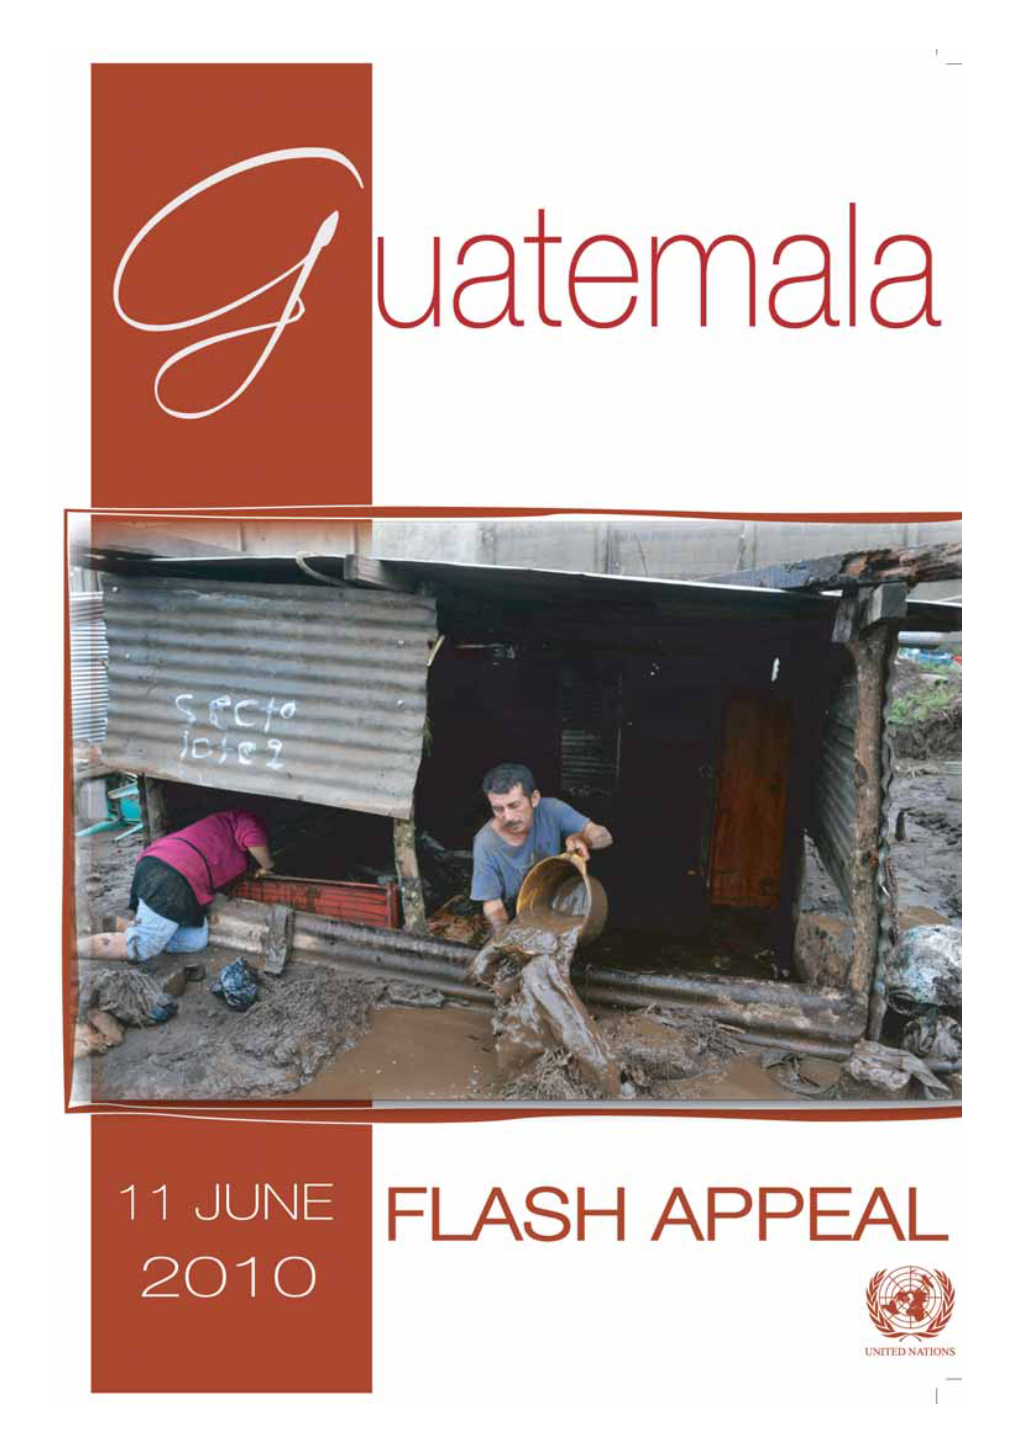 Flash Appeal Issued Following the Severe Flooding in Guatemala